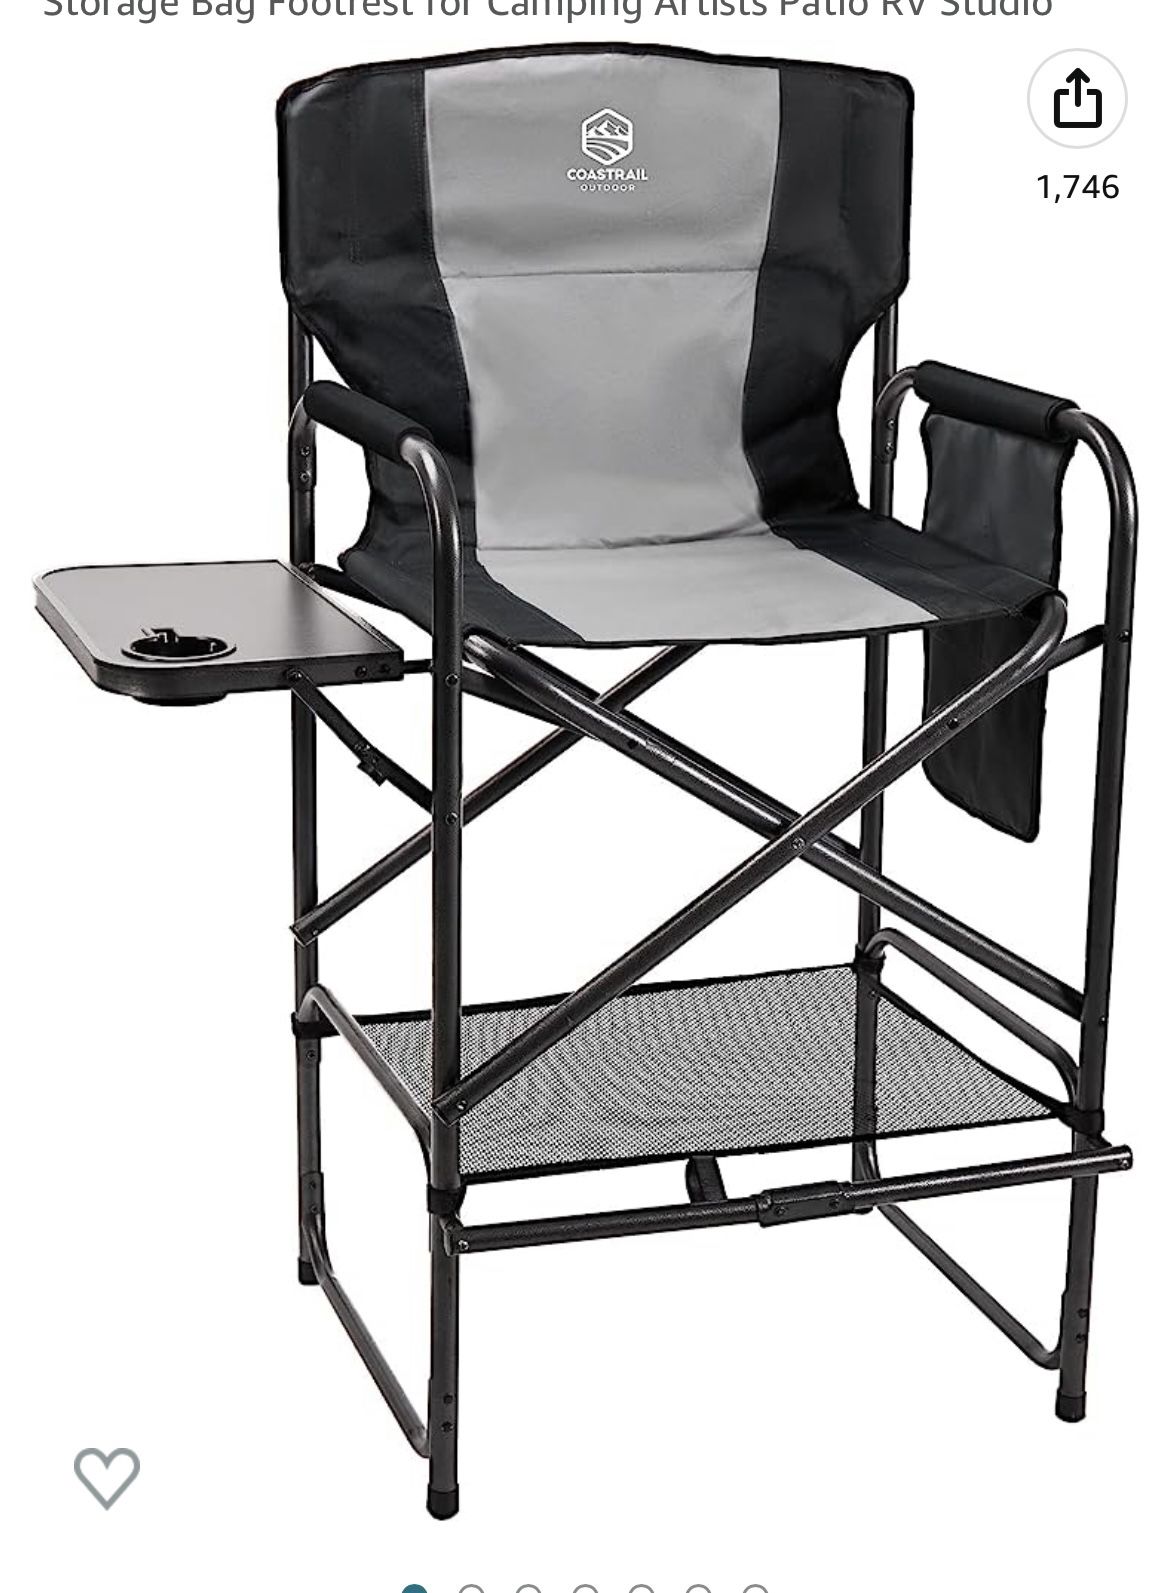 Tall Director’s Chair. $35.  2/$60